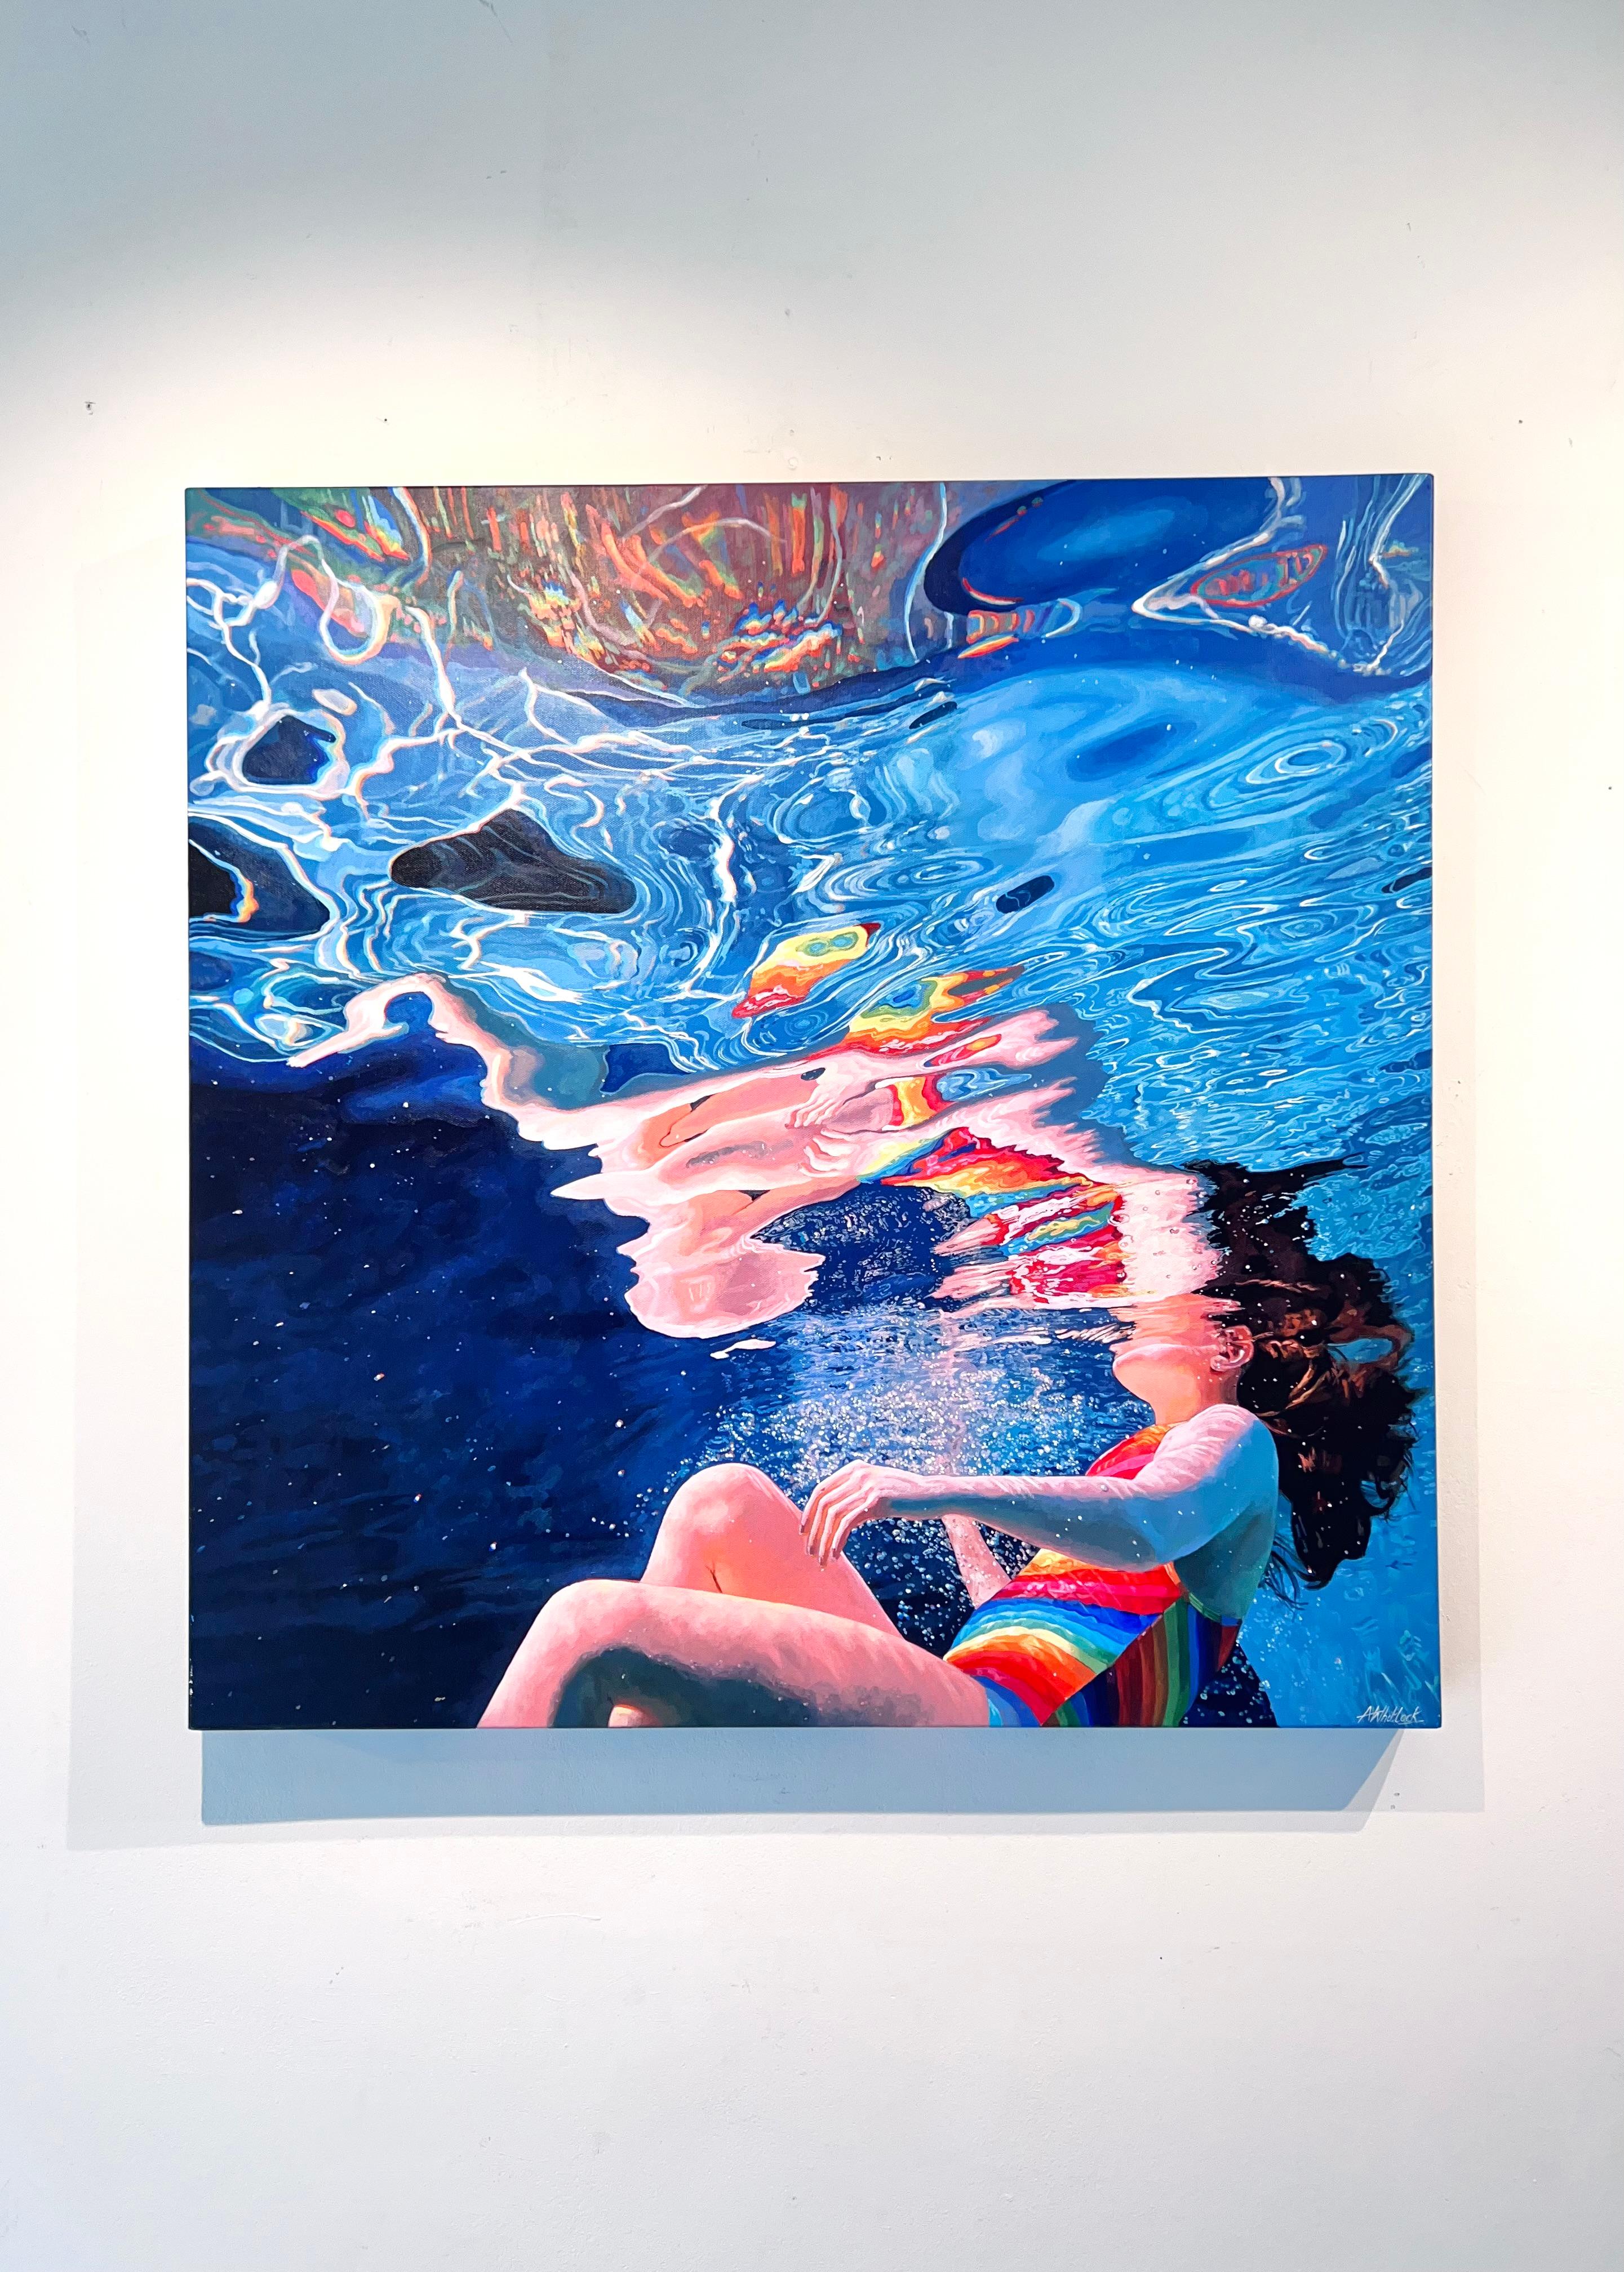 Origin-original hyperrealistic figurative waterscape painting-contemporary art  - Painting by Abi Whitlock